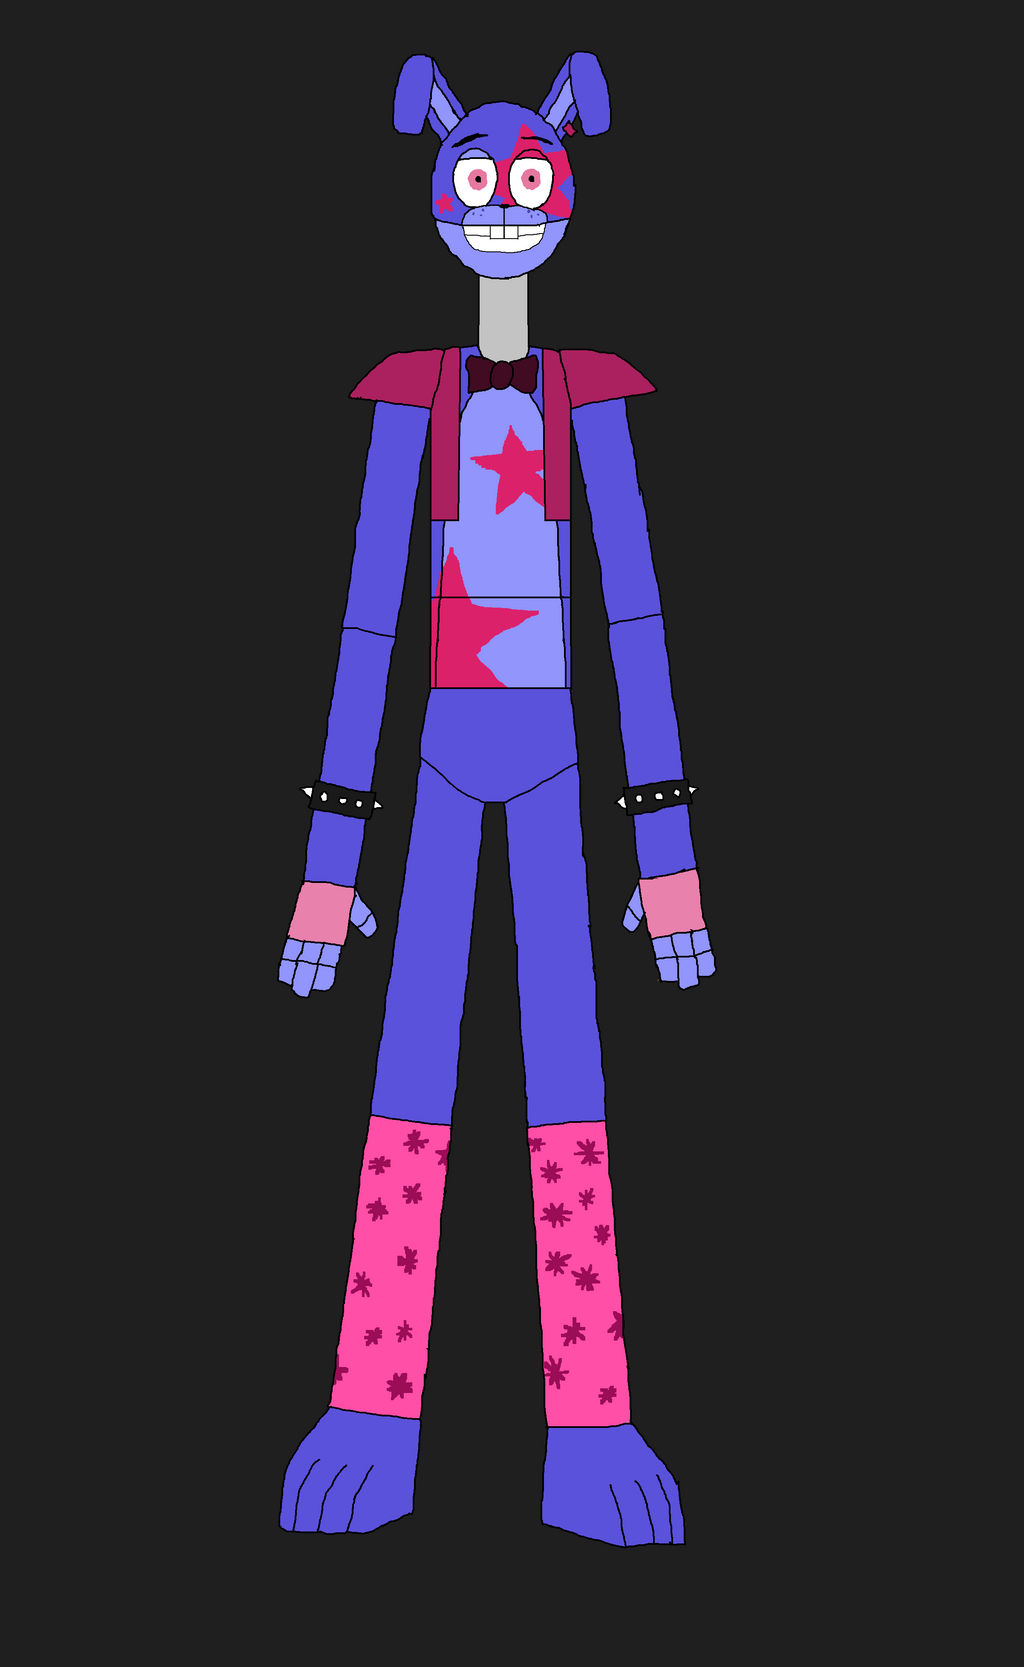 My Glamrock Bonnie design (character cut-out style) : r/fivenightsatfreddys